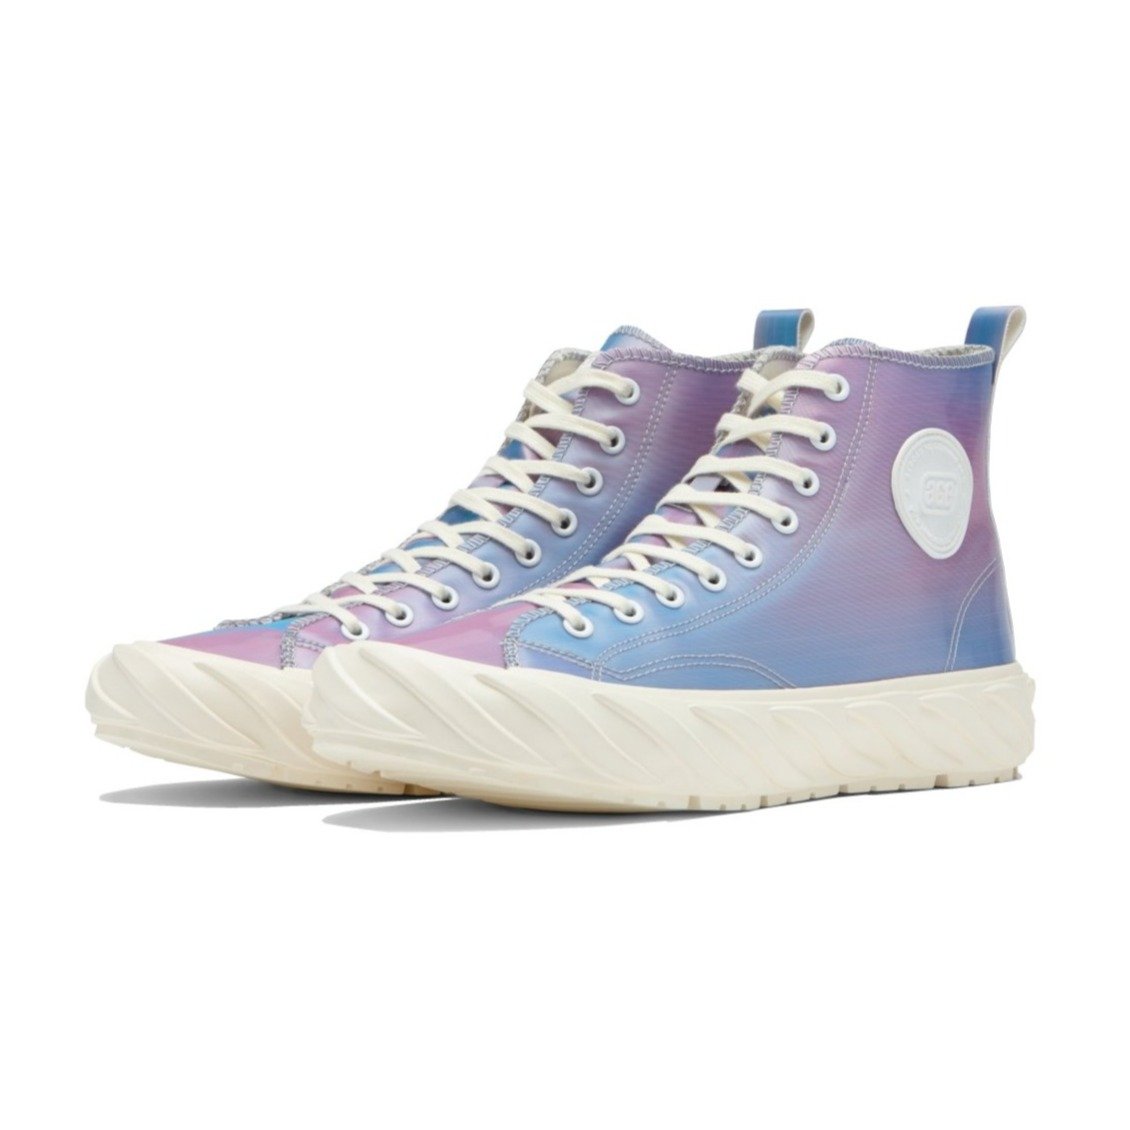 AGE SNEAKERS High Top Canvas Prism Color